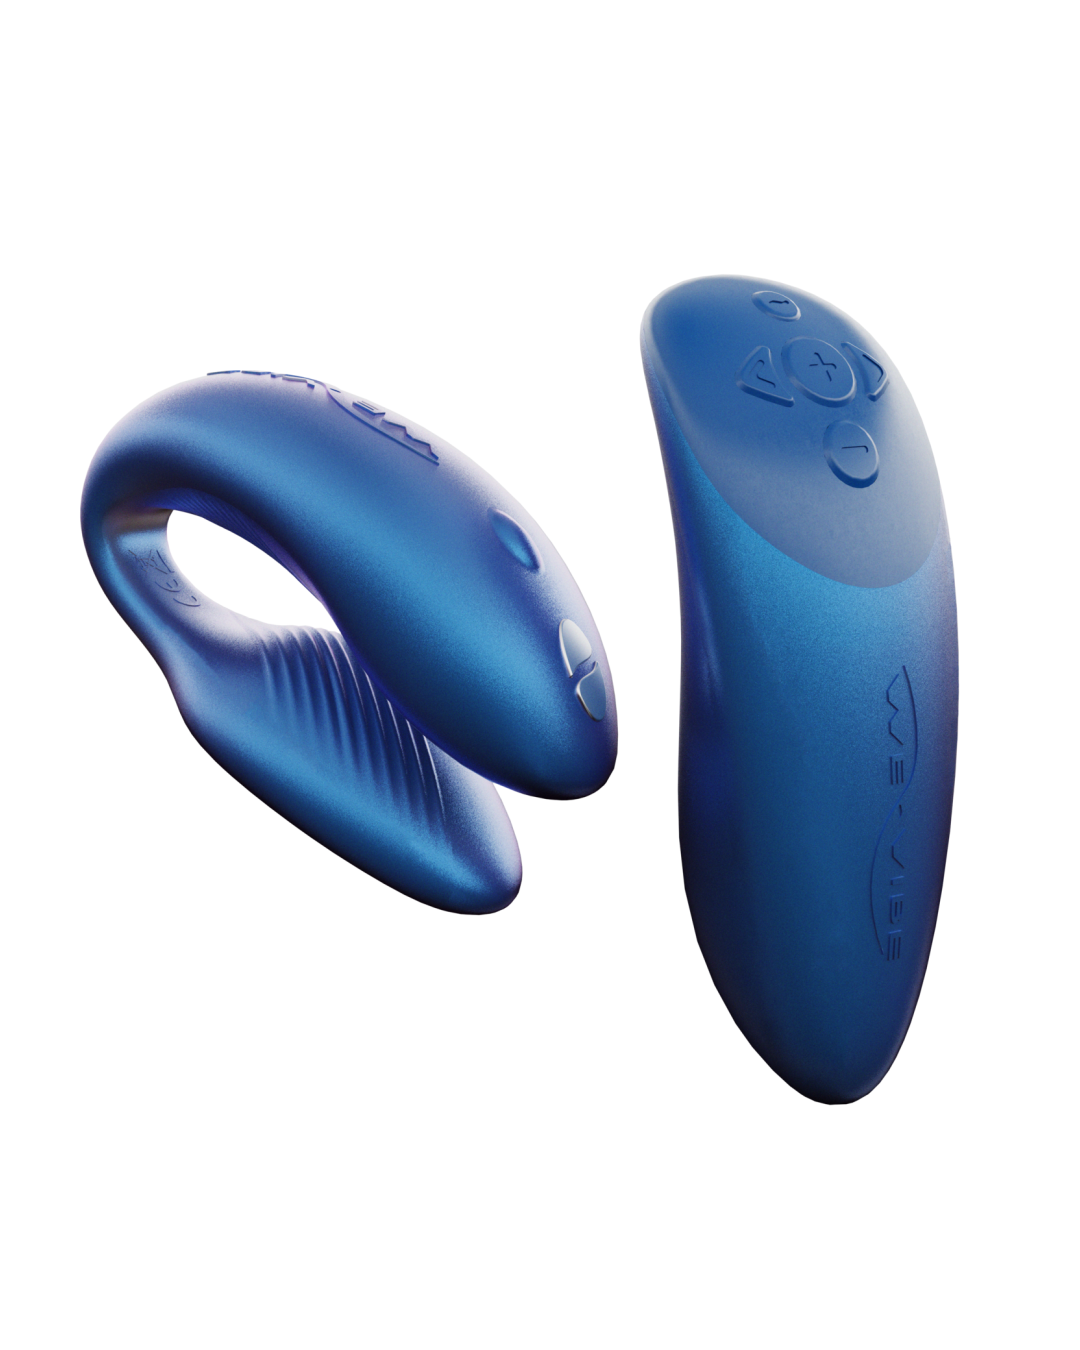 We-Vibe Chorus Remote & App Controlled Couples' Vibrator - Cosmic Blue on white background